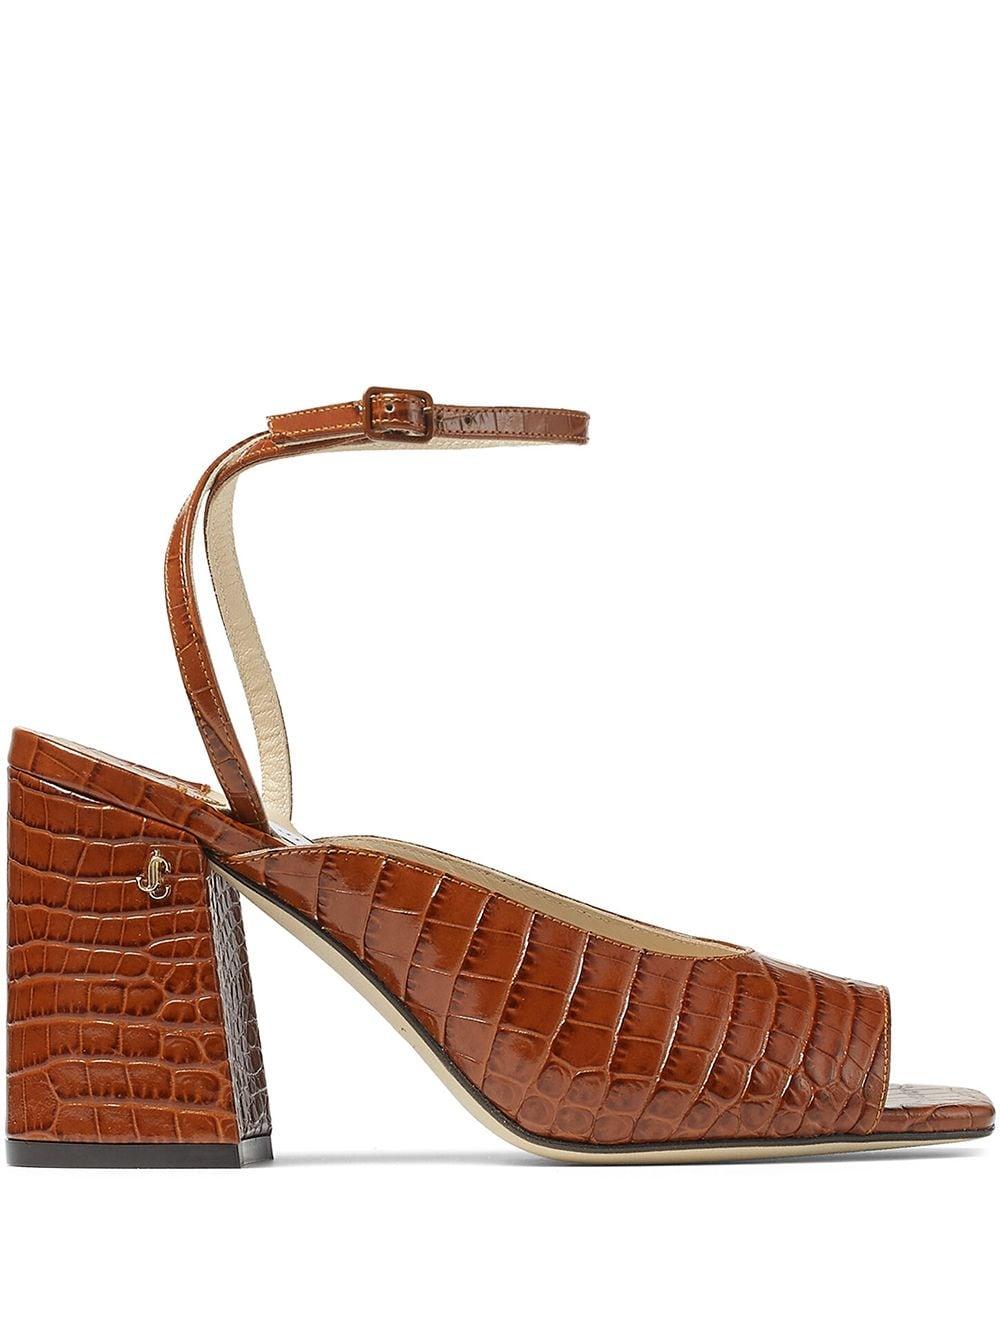 Jimmy Choo Jassidy Croc-embossed Leather Sandals in Tan (Brown) | Lyst